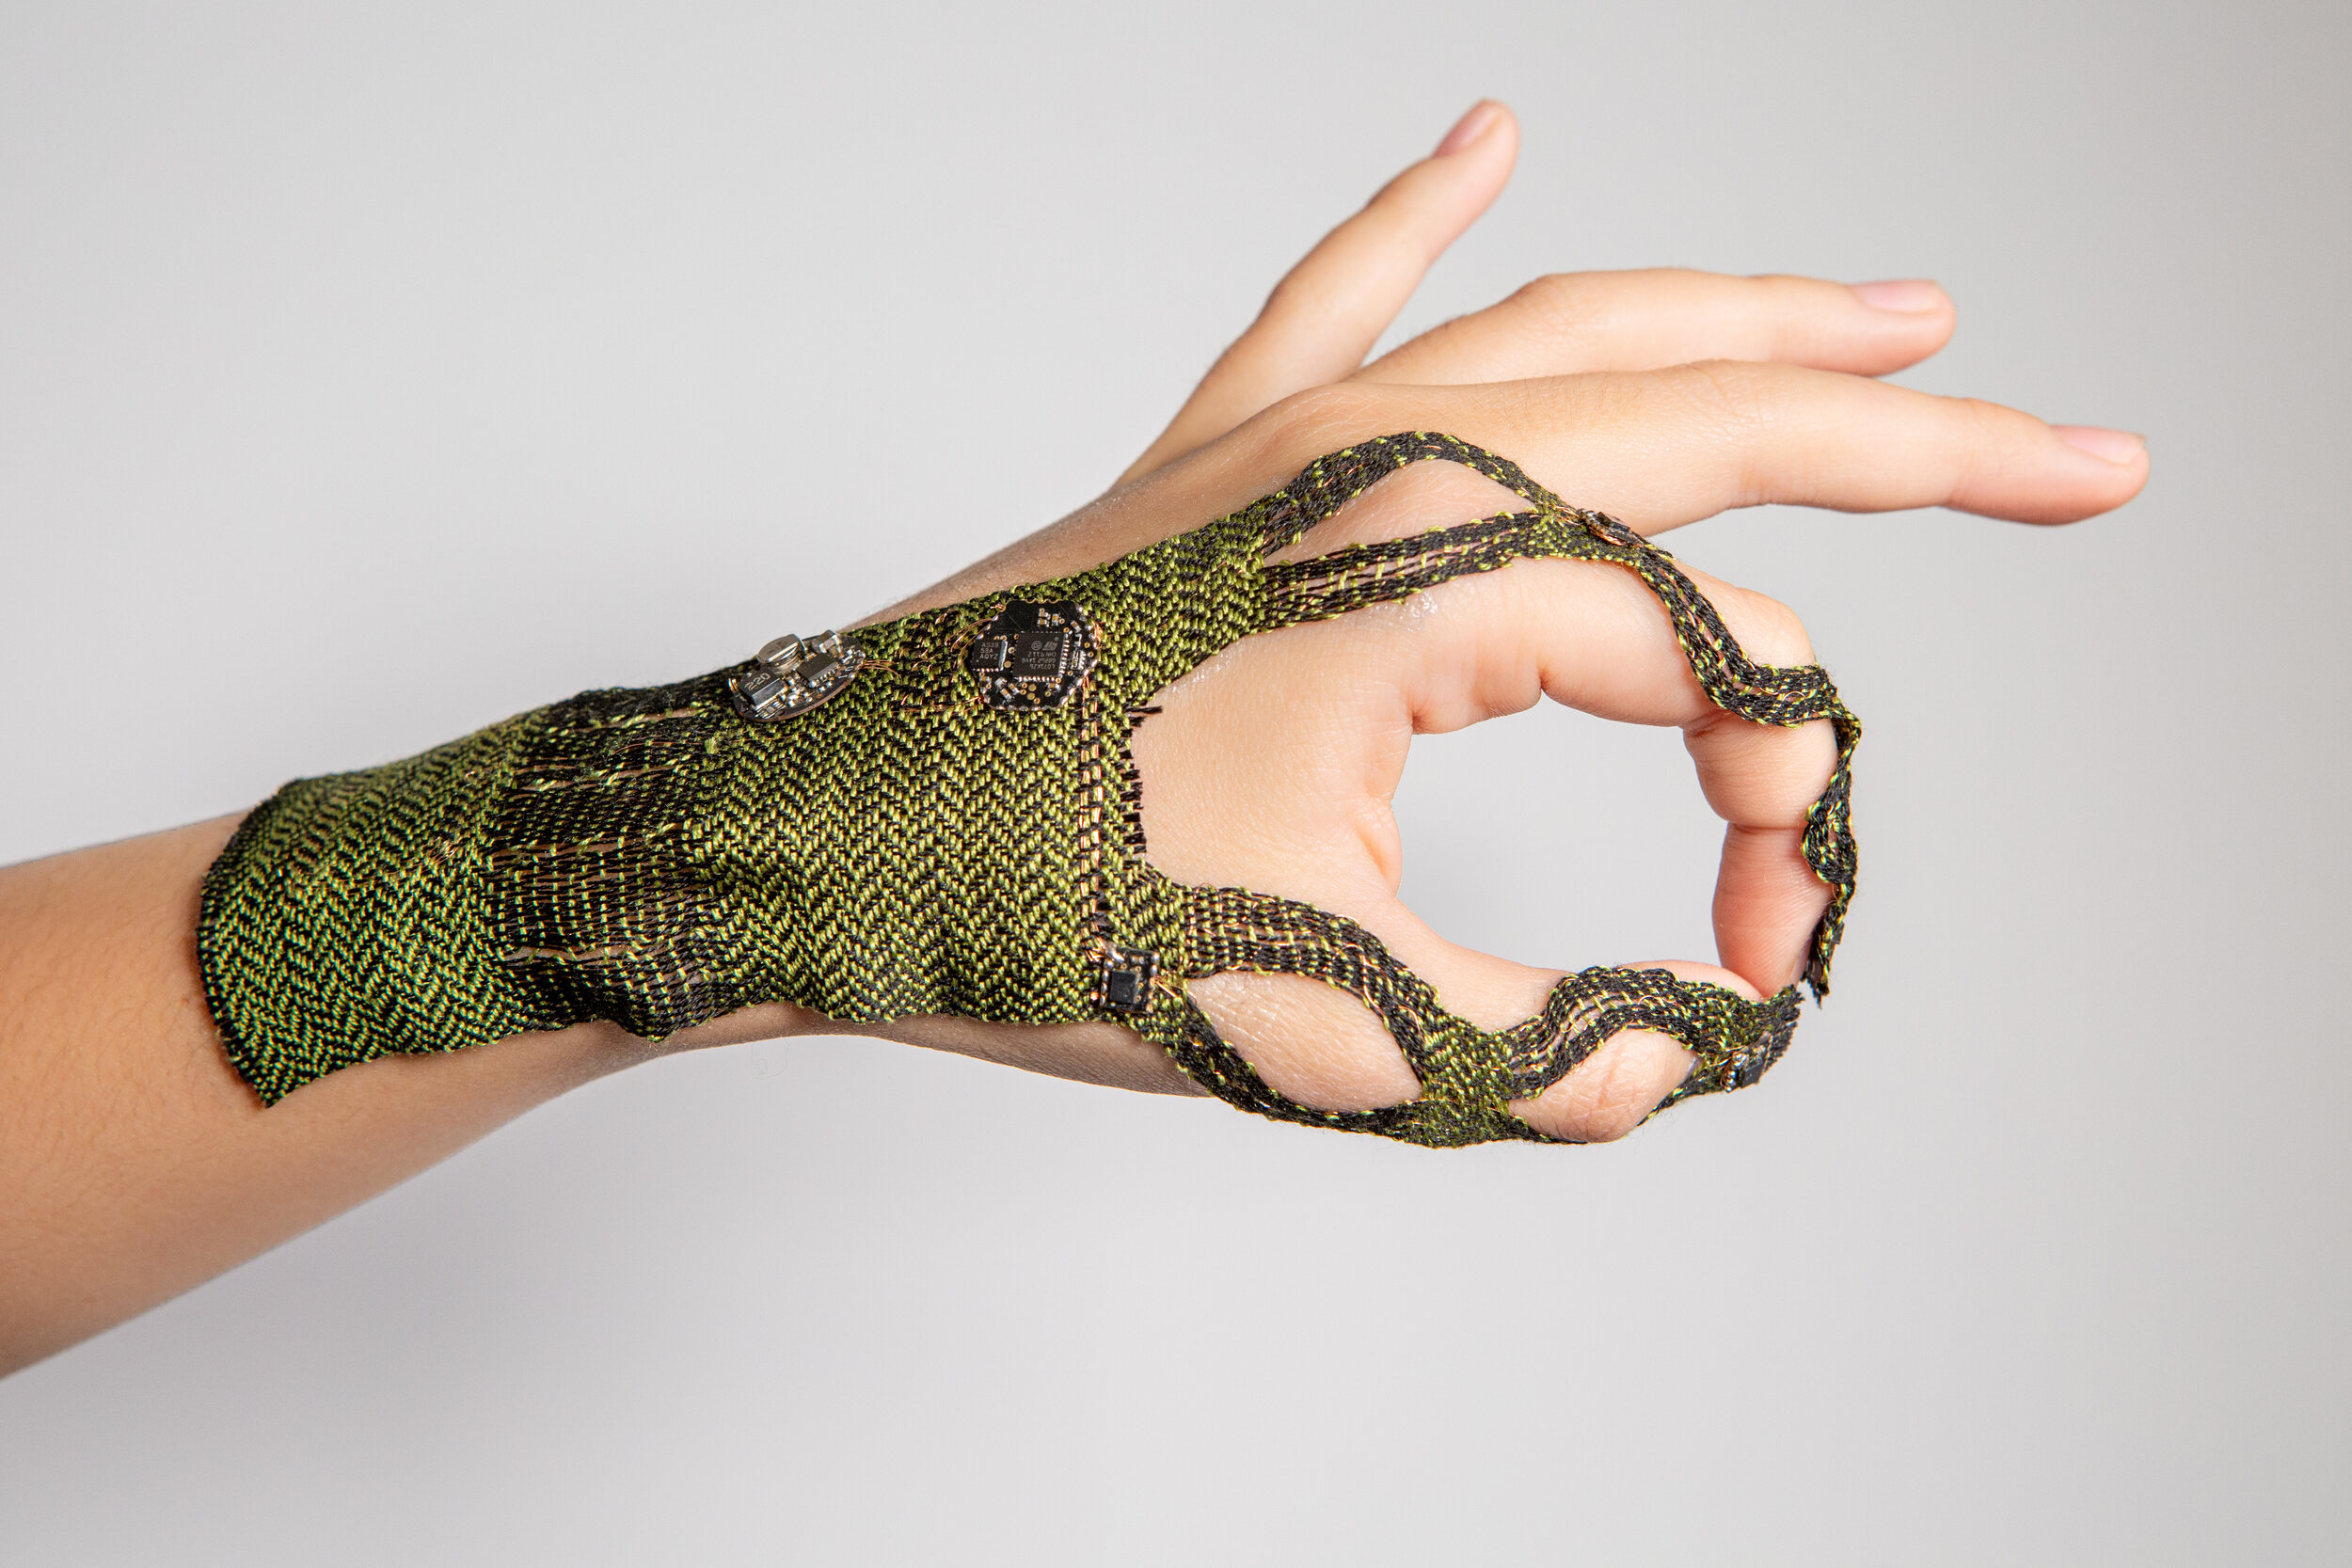  WovenProbe, the index-finger and thumb-based inertial measurement unit (IMU) tracking system explored in this project. It includes a woven bandage-like interface that supports complex on-skin circuitry: four IMUs on the tips and ends of the thumb an